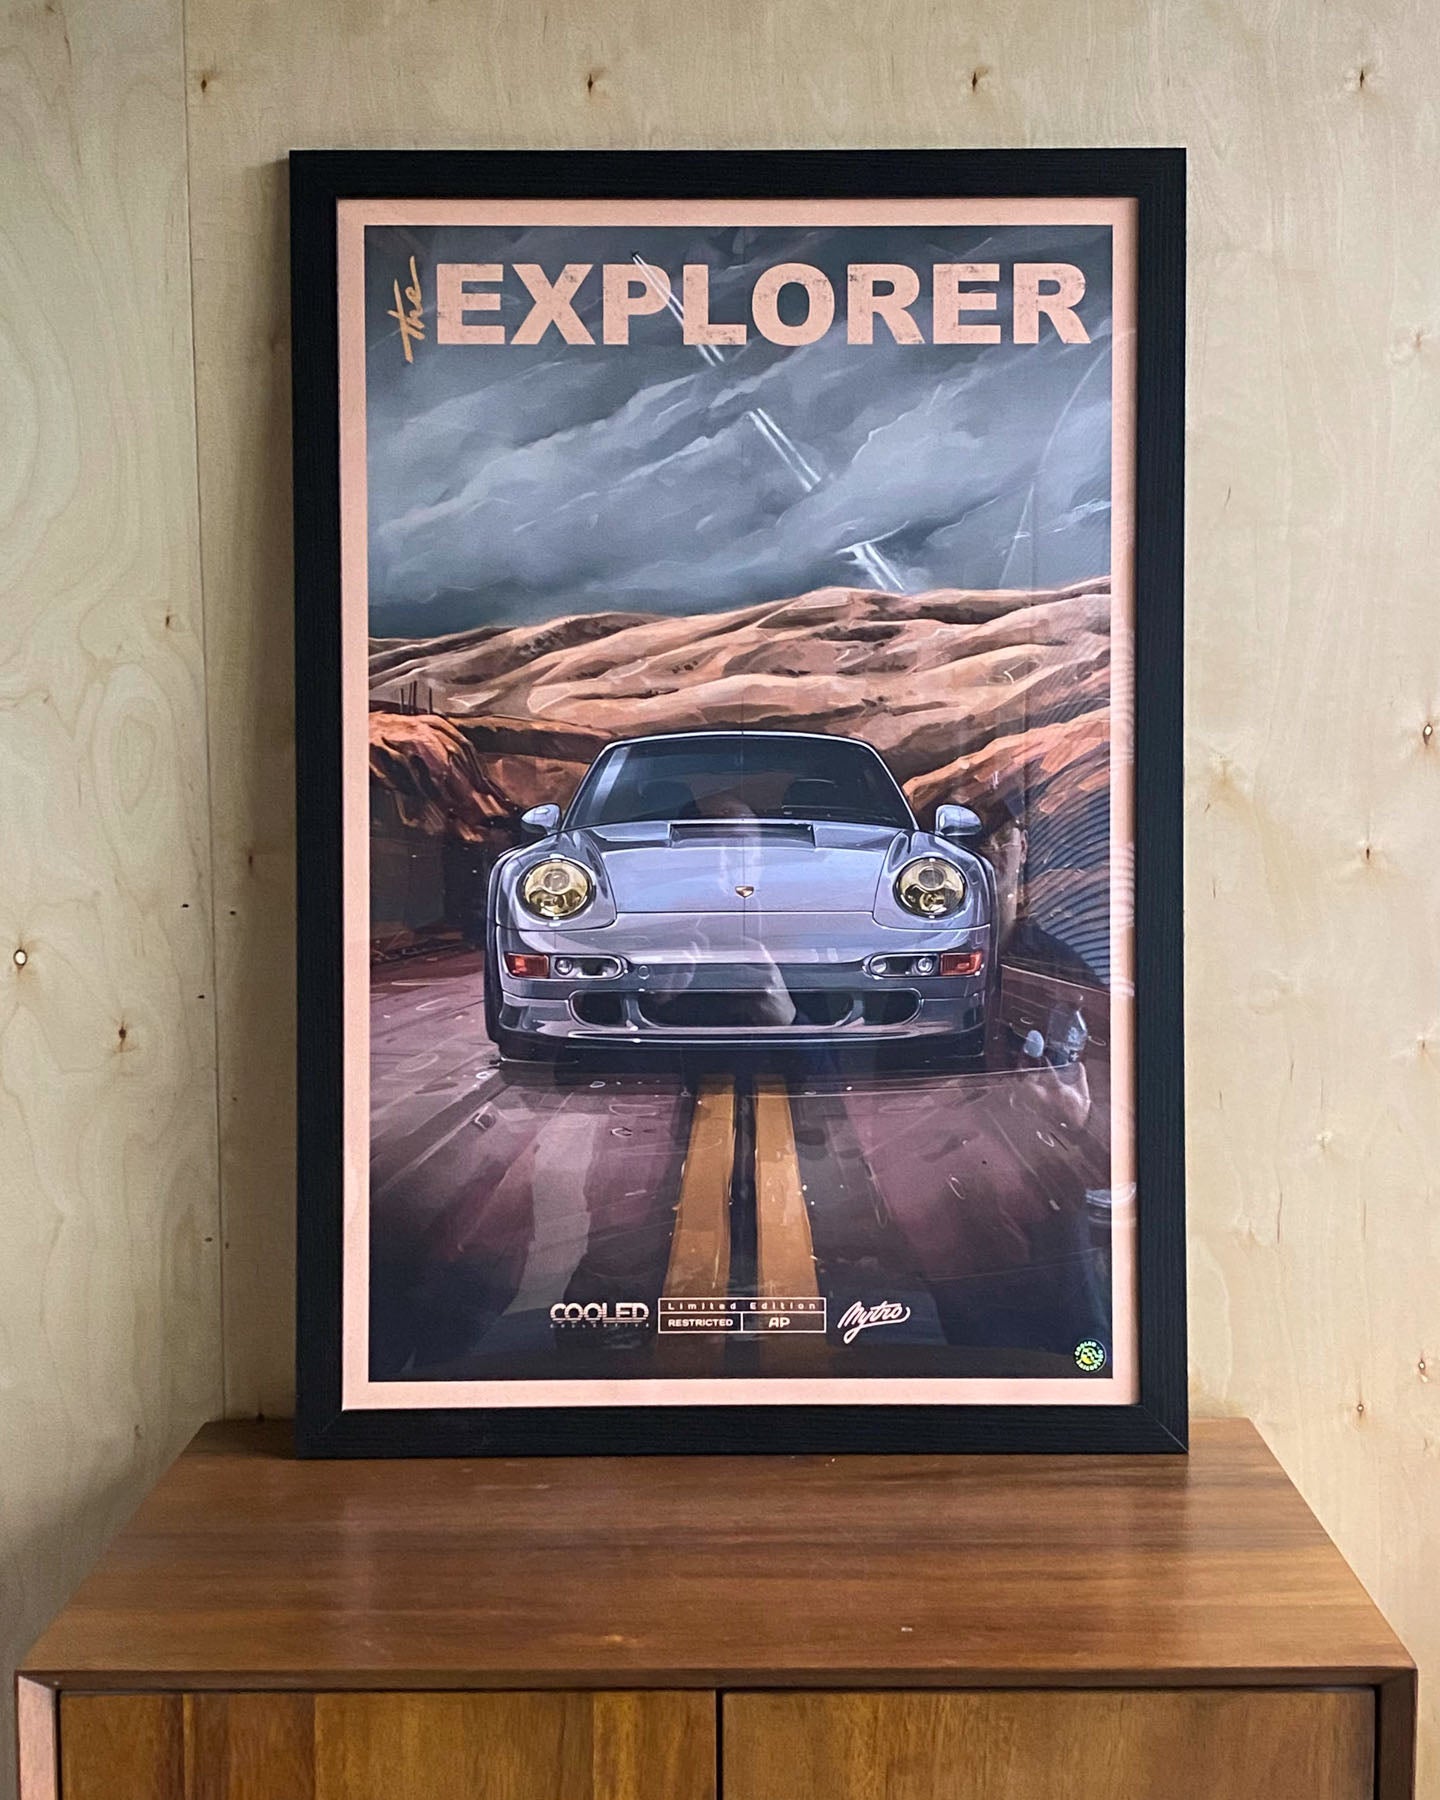 The Explorer Poster collab w/Andrew Mytro Limited!